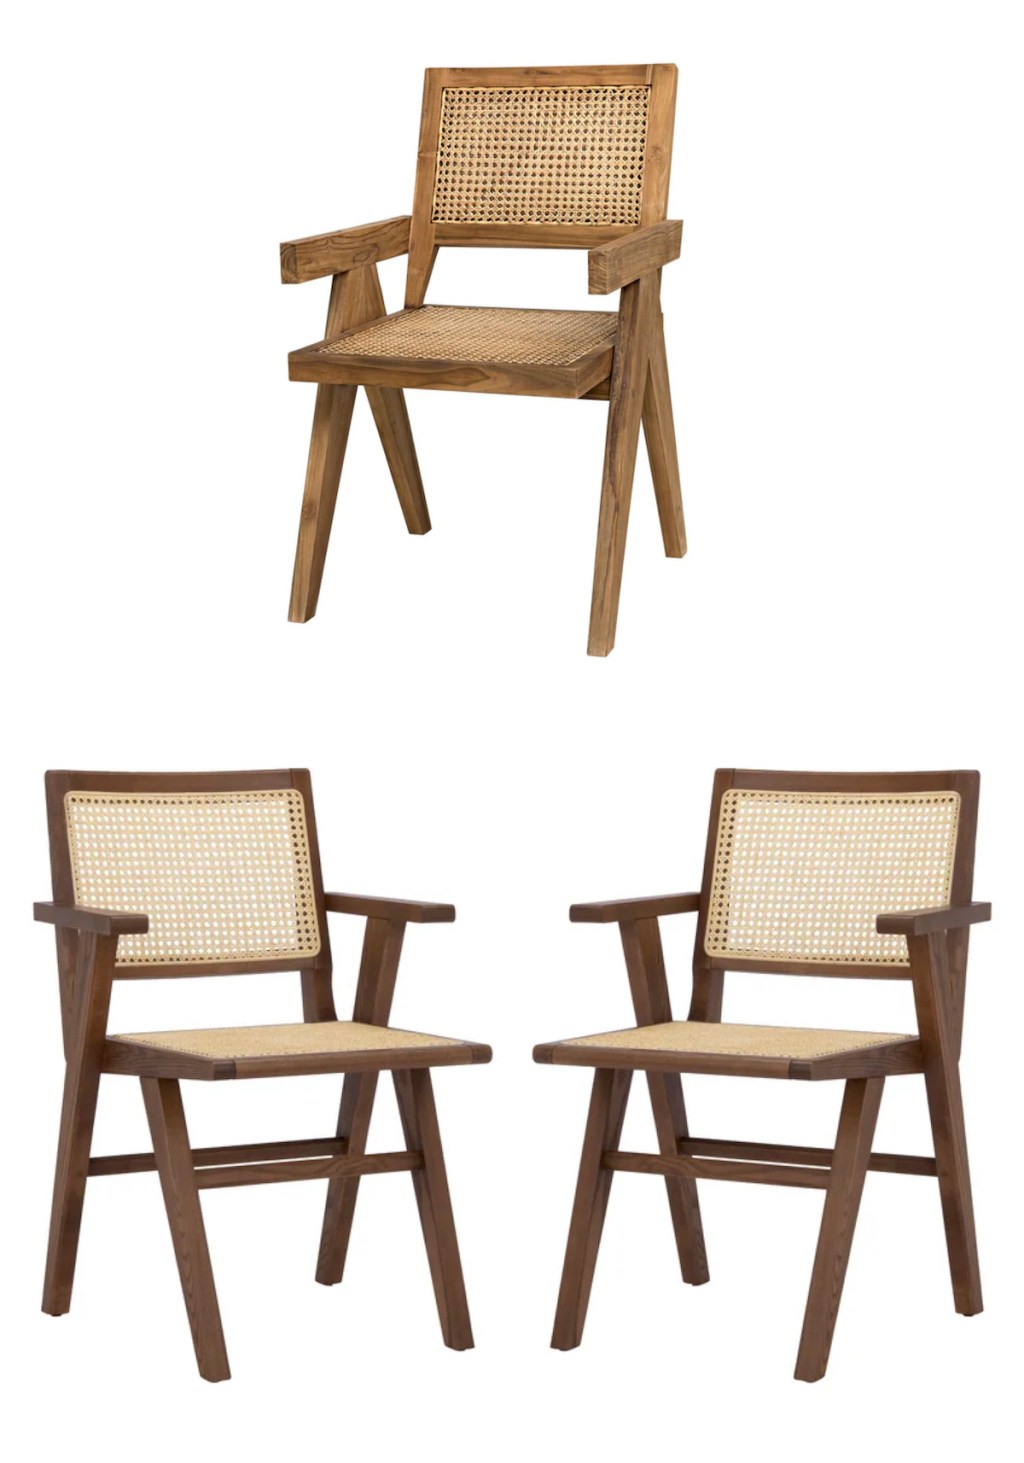 caned wood teak chairs stock photos